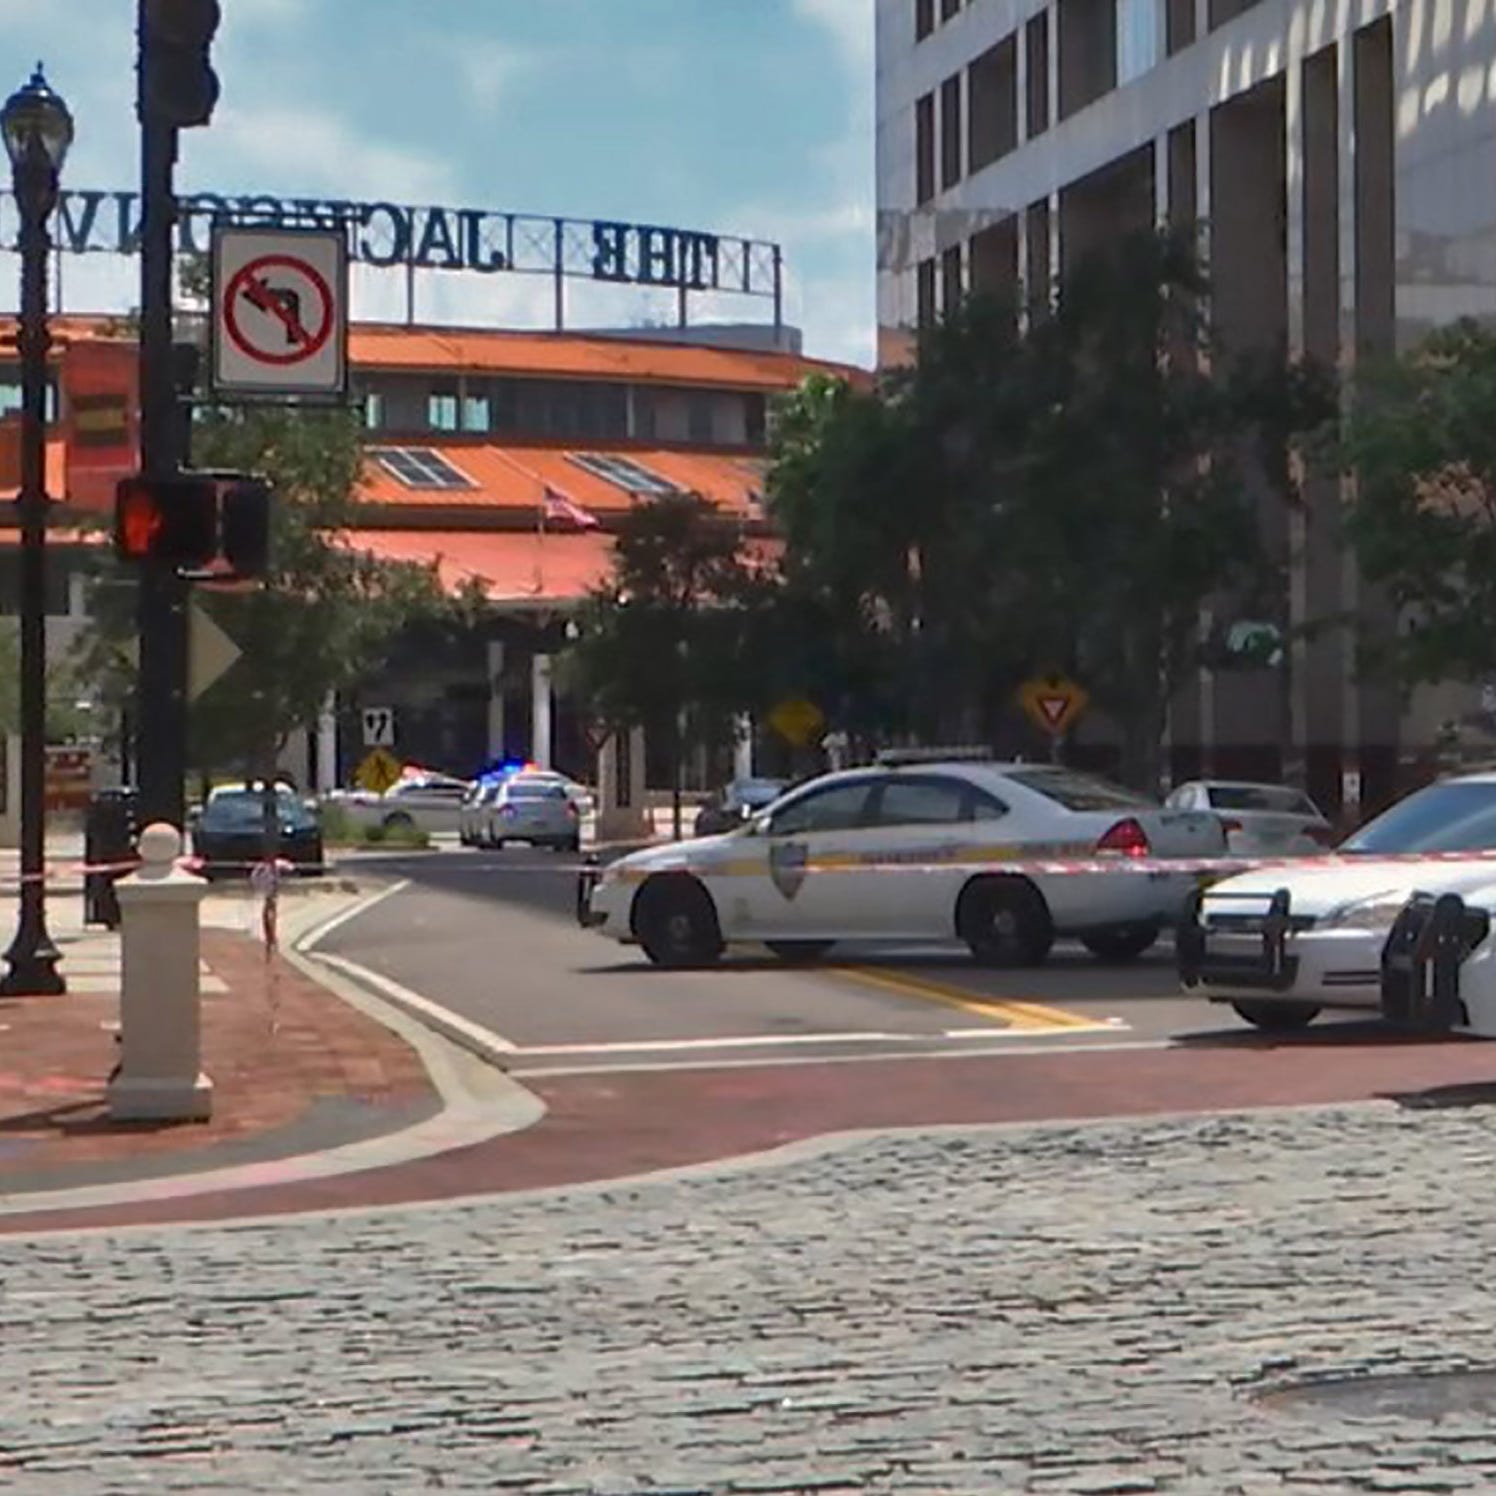 This handout image distributed courtesy of WJXT, a local Jacksonville television station, shows police cars blocking a street leading to the Jacksonville Landing area in downtown Jacksonville, Florida, August 26, 2018. Several people have been killed